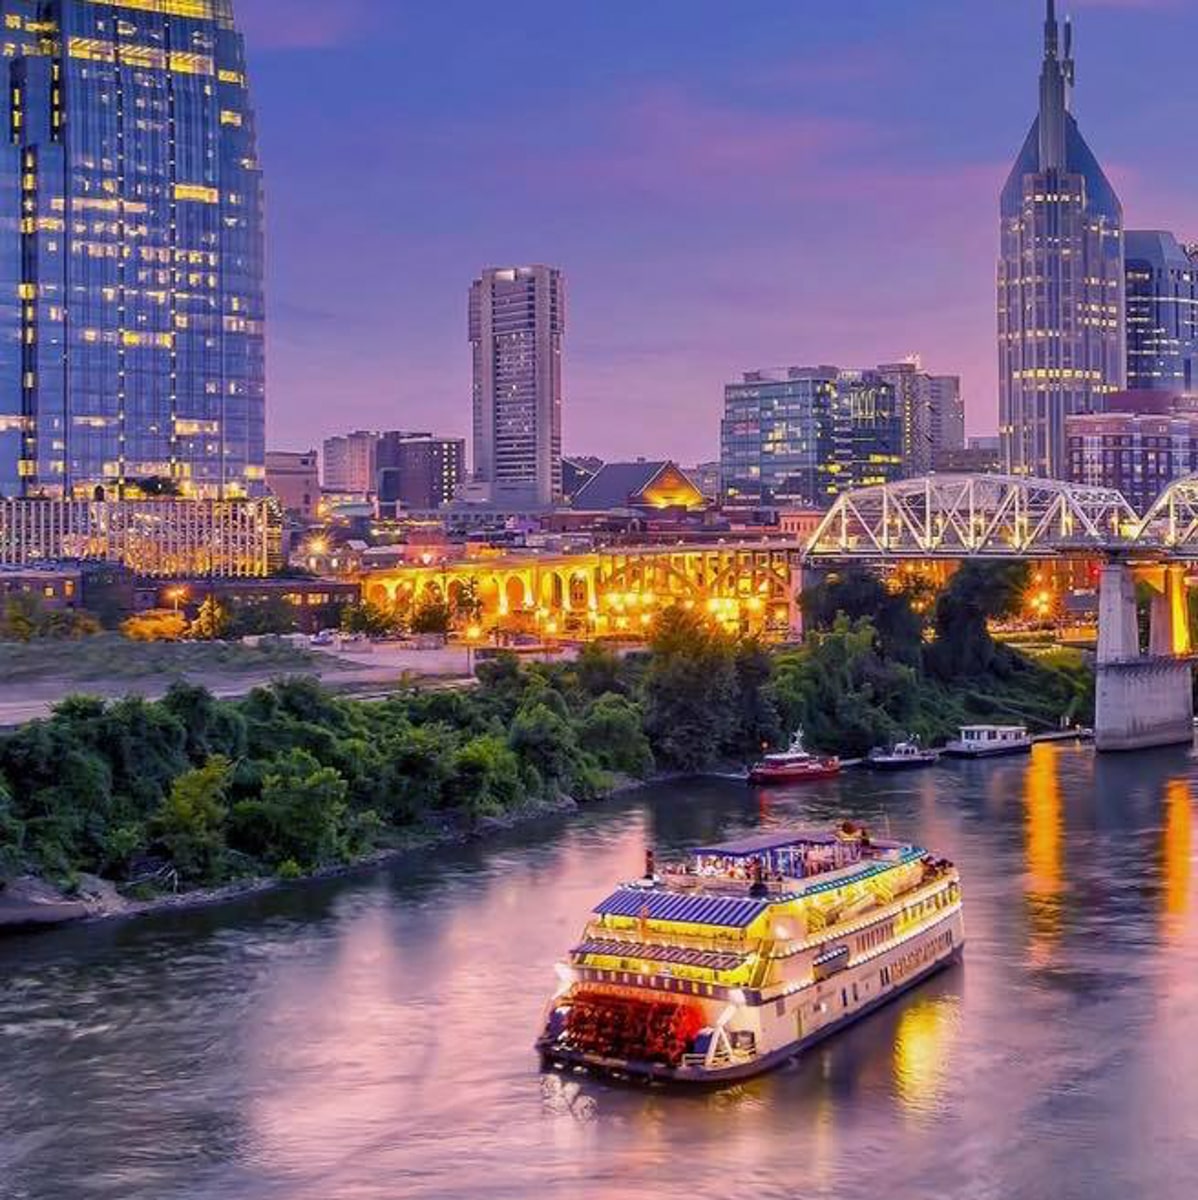 Dinner Cruise in Nashville at dusk with lights and city skyline